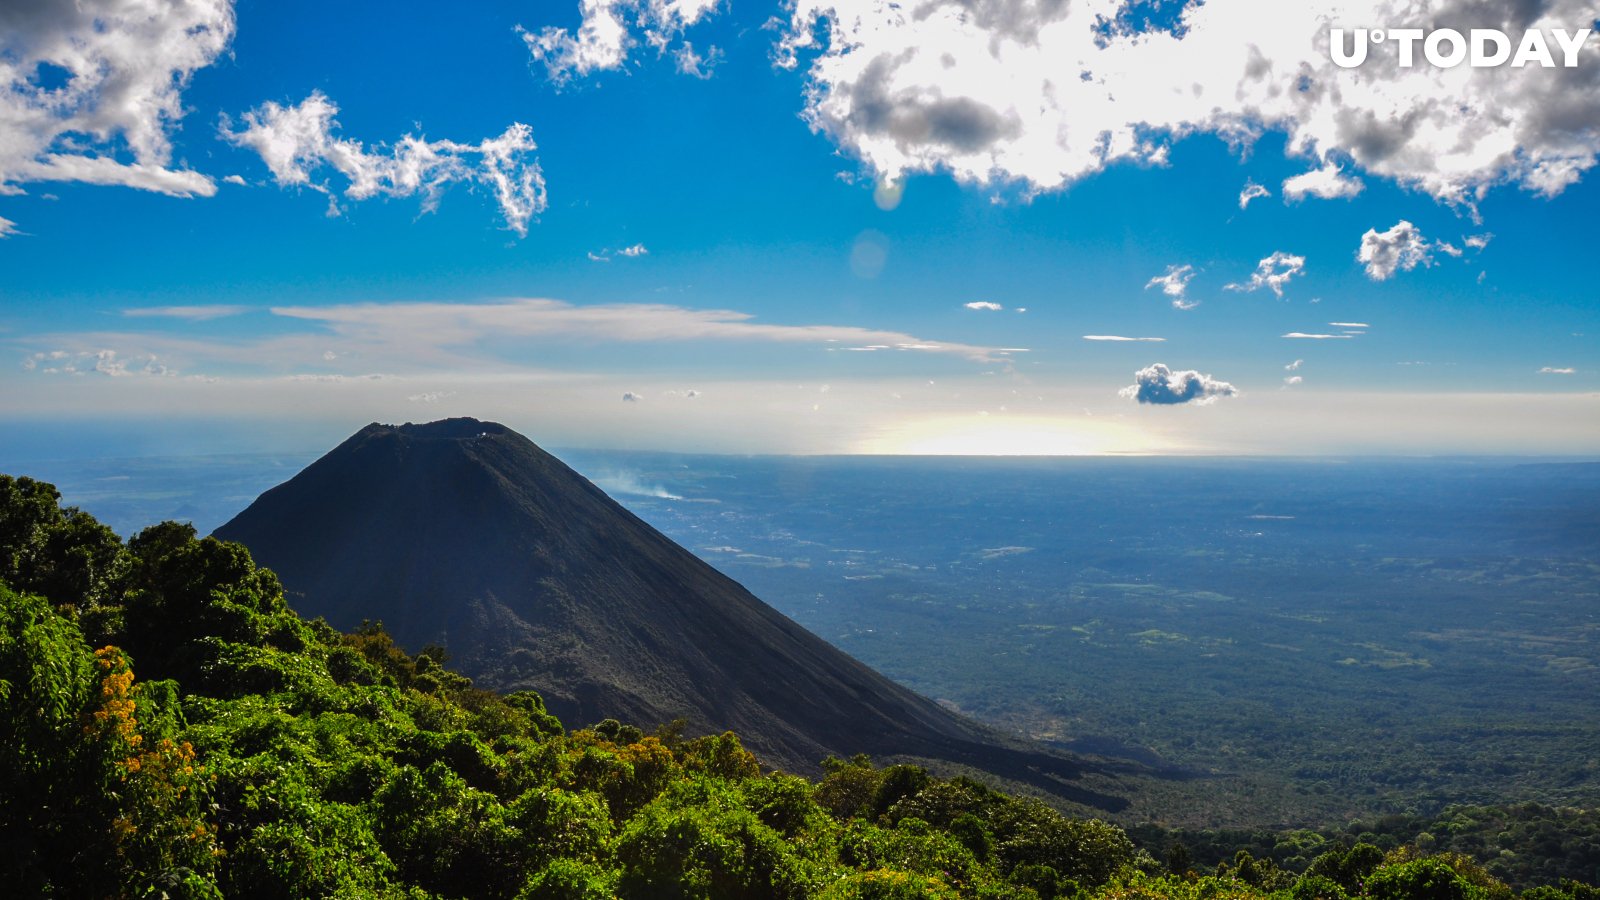 Bitcoin May Actually Be Mined with Volcano Energy in El Salvador